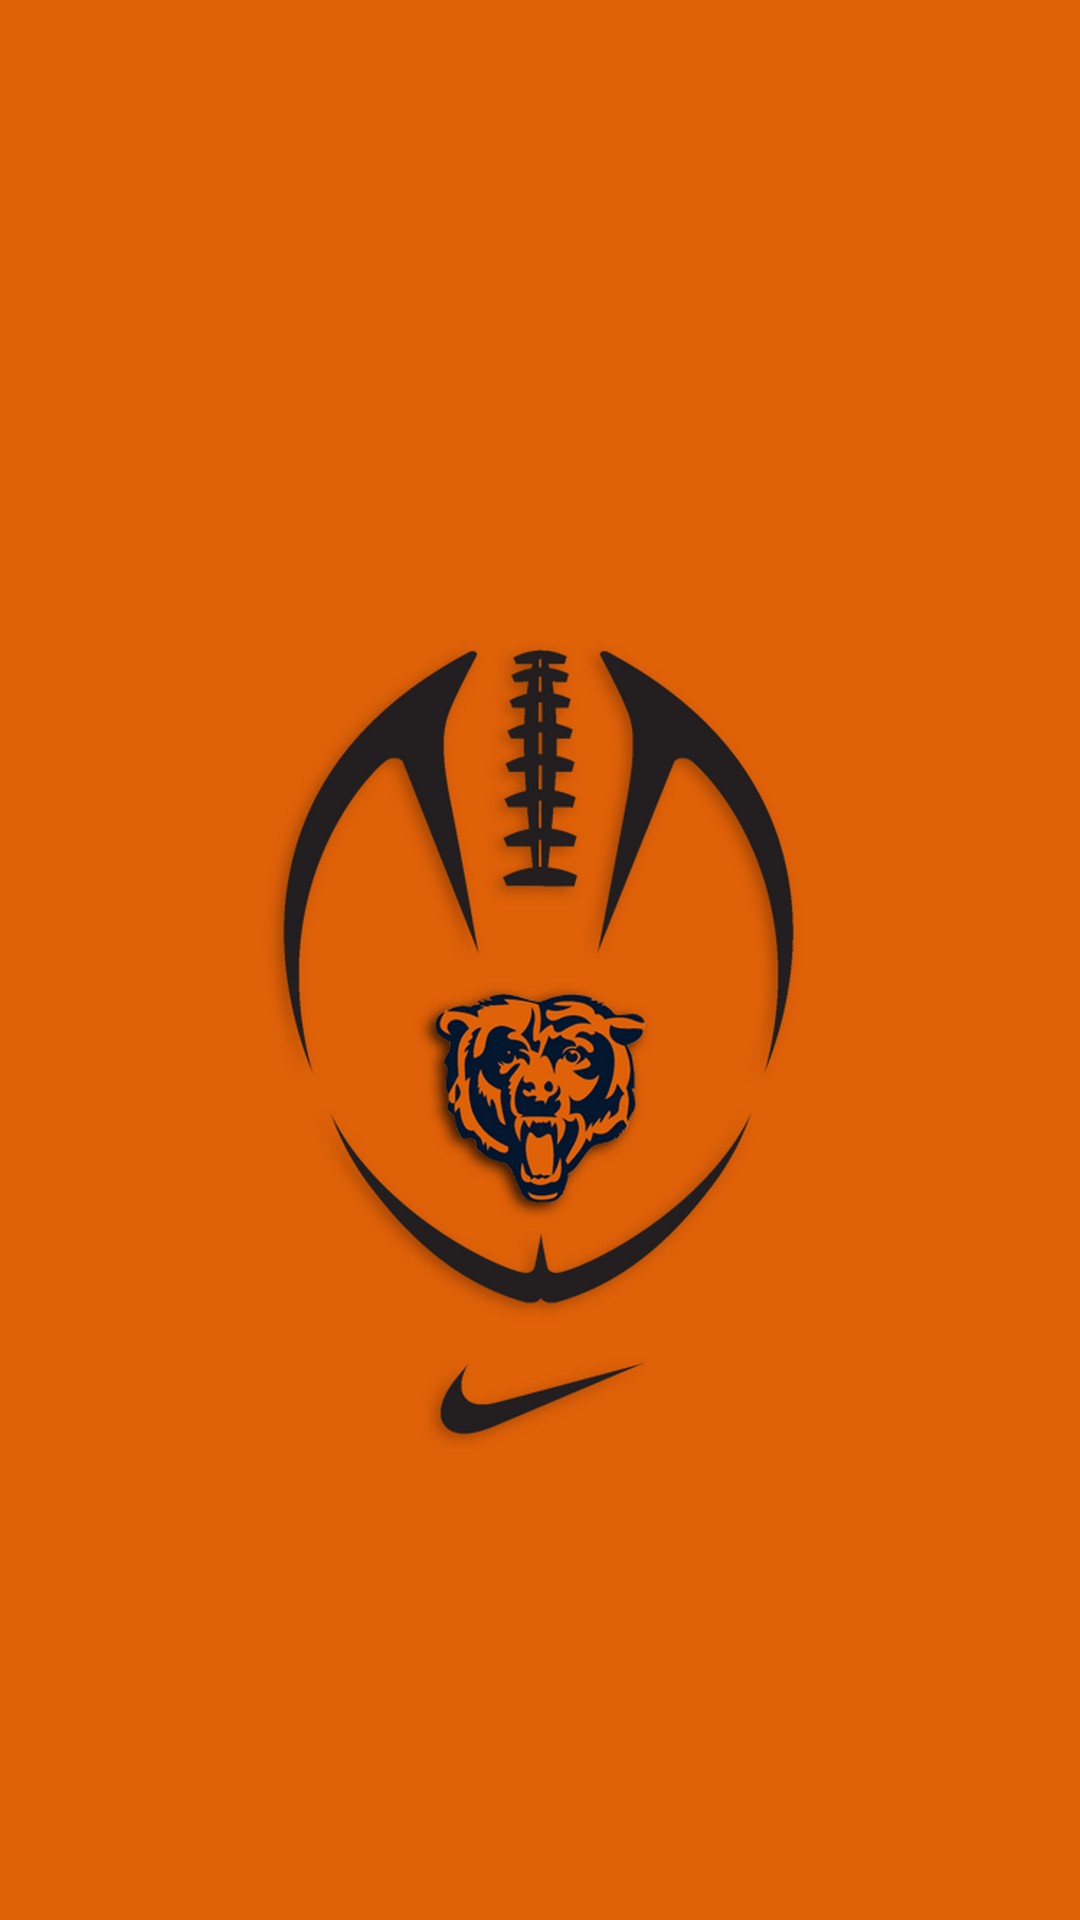 Chicago Bears iPhone X Wallpaper With high-resolution 1080X1920 pixel. Download and set as wallpaper for Apple iPhone X, XS Max, XR, 8, 7, 6, SE, iPad, Android